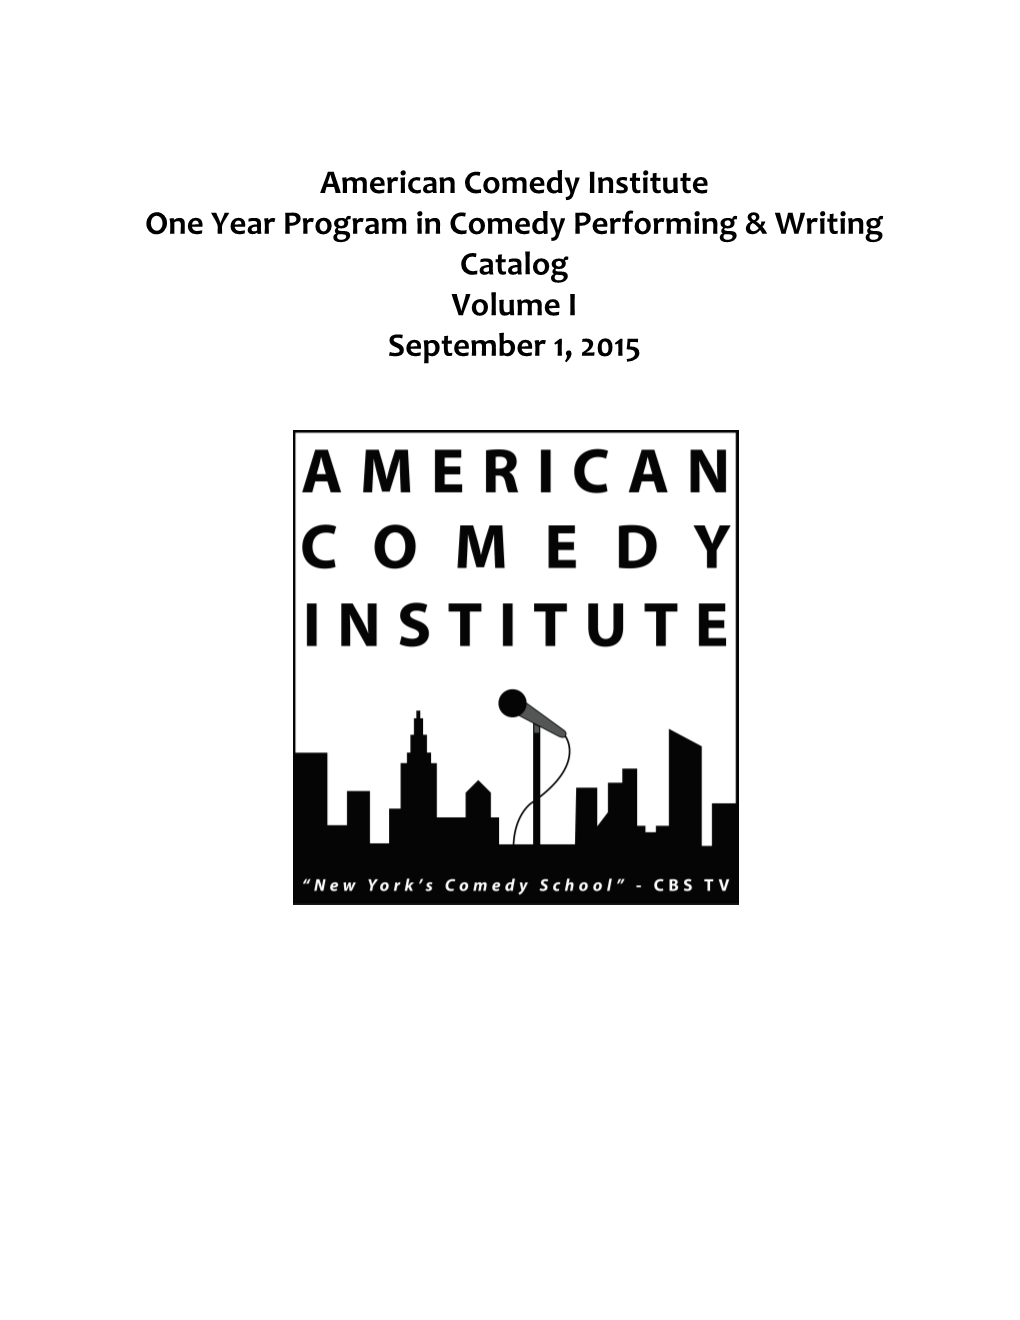 American Comedy Institute One Year Program in Comedy Performing & Writing Catalog Volume I September 1, 2015